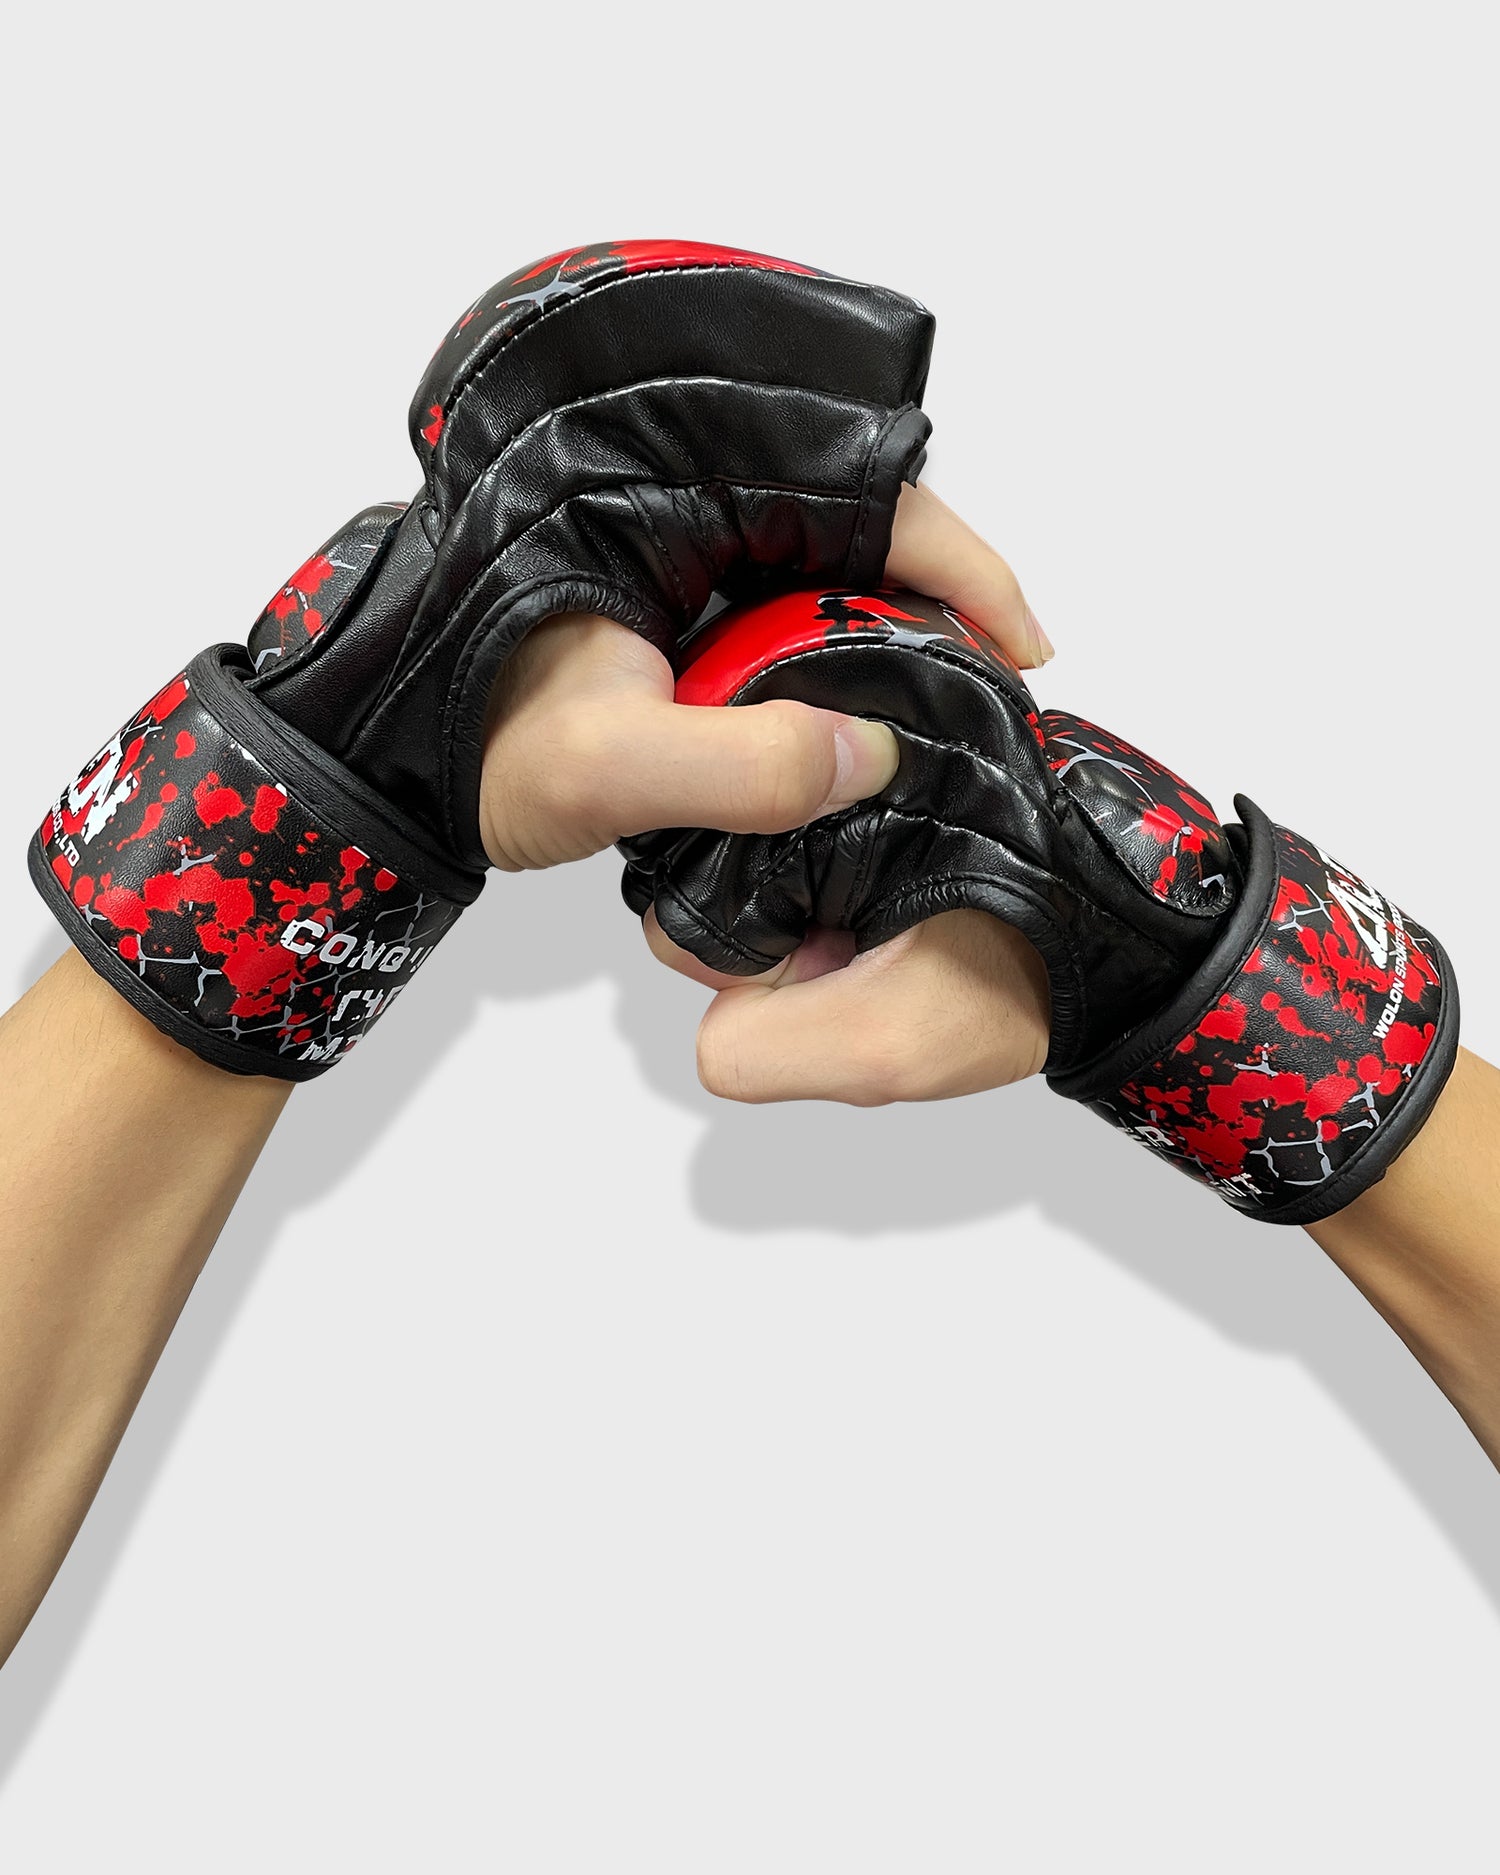 Lace n Loop - Just a beautiful pair of gloves hanging on the ring 🥊 • • •  • • #lacenloop #boxing #boxinggloves #boxingtraining #muaythai  #muaythaitraining #mma #mmatraining #fighttips #mmatips #ufc #striking  #heavybag #kickboxing #laceups